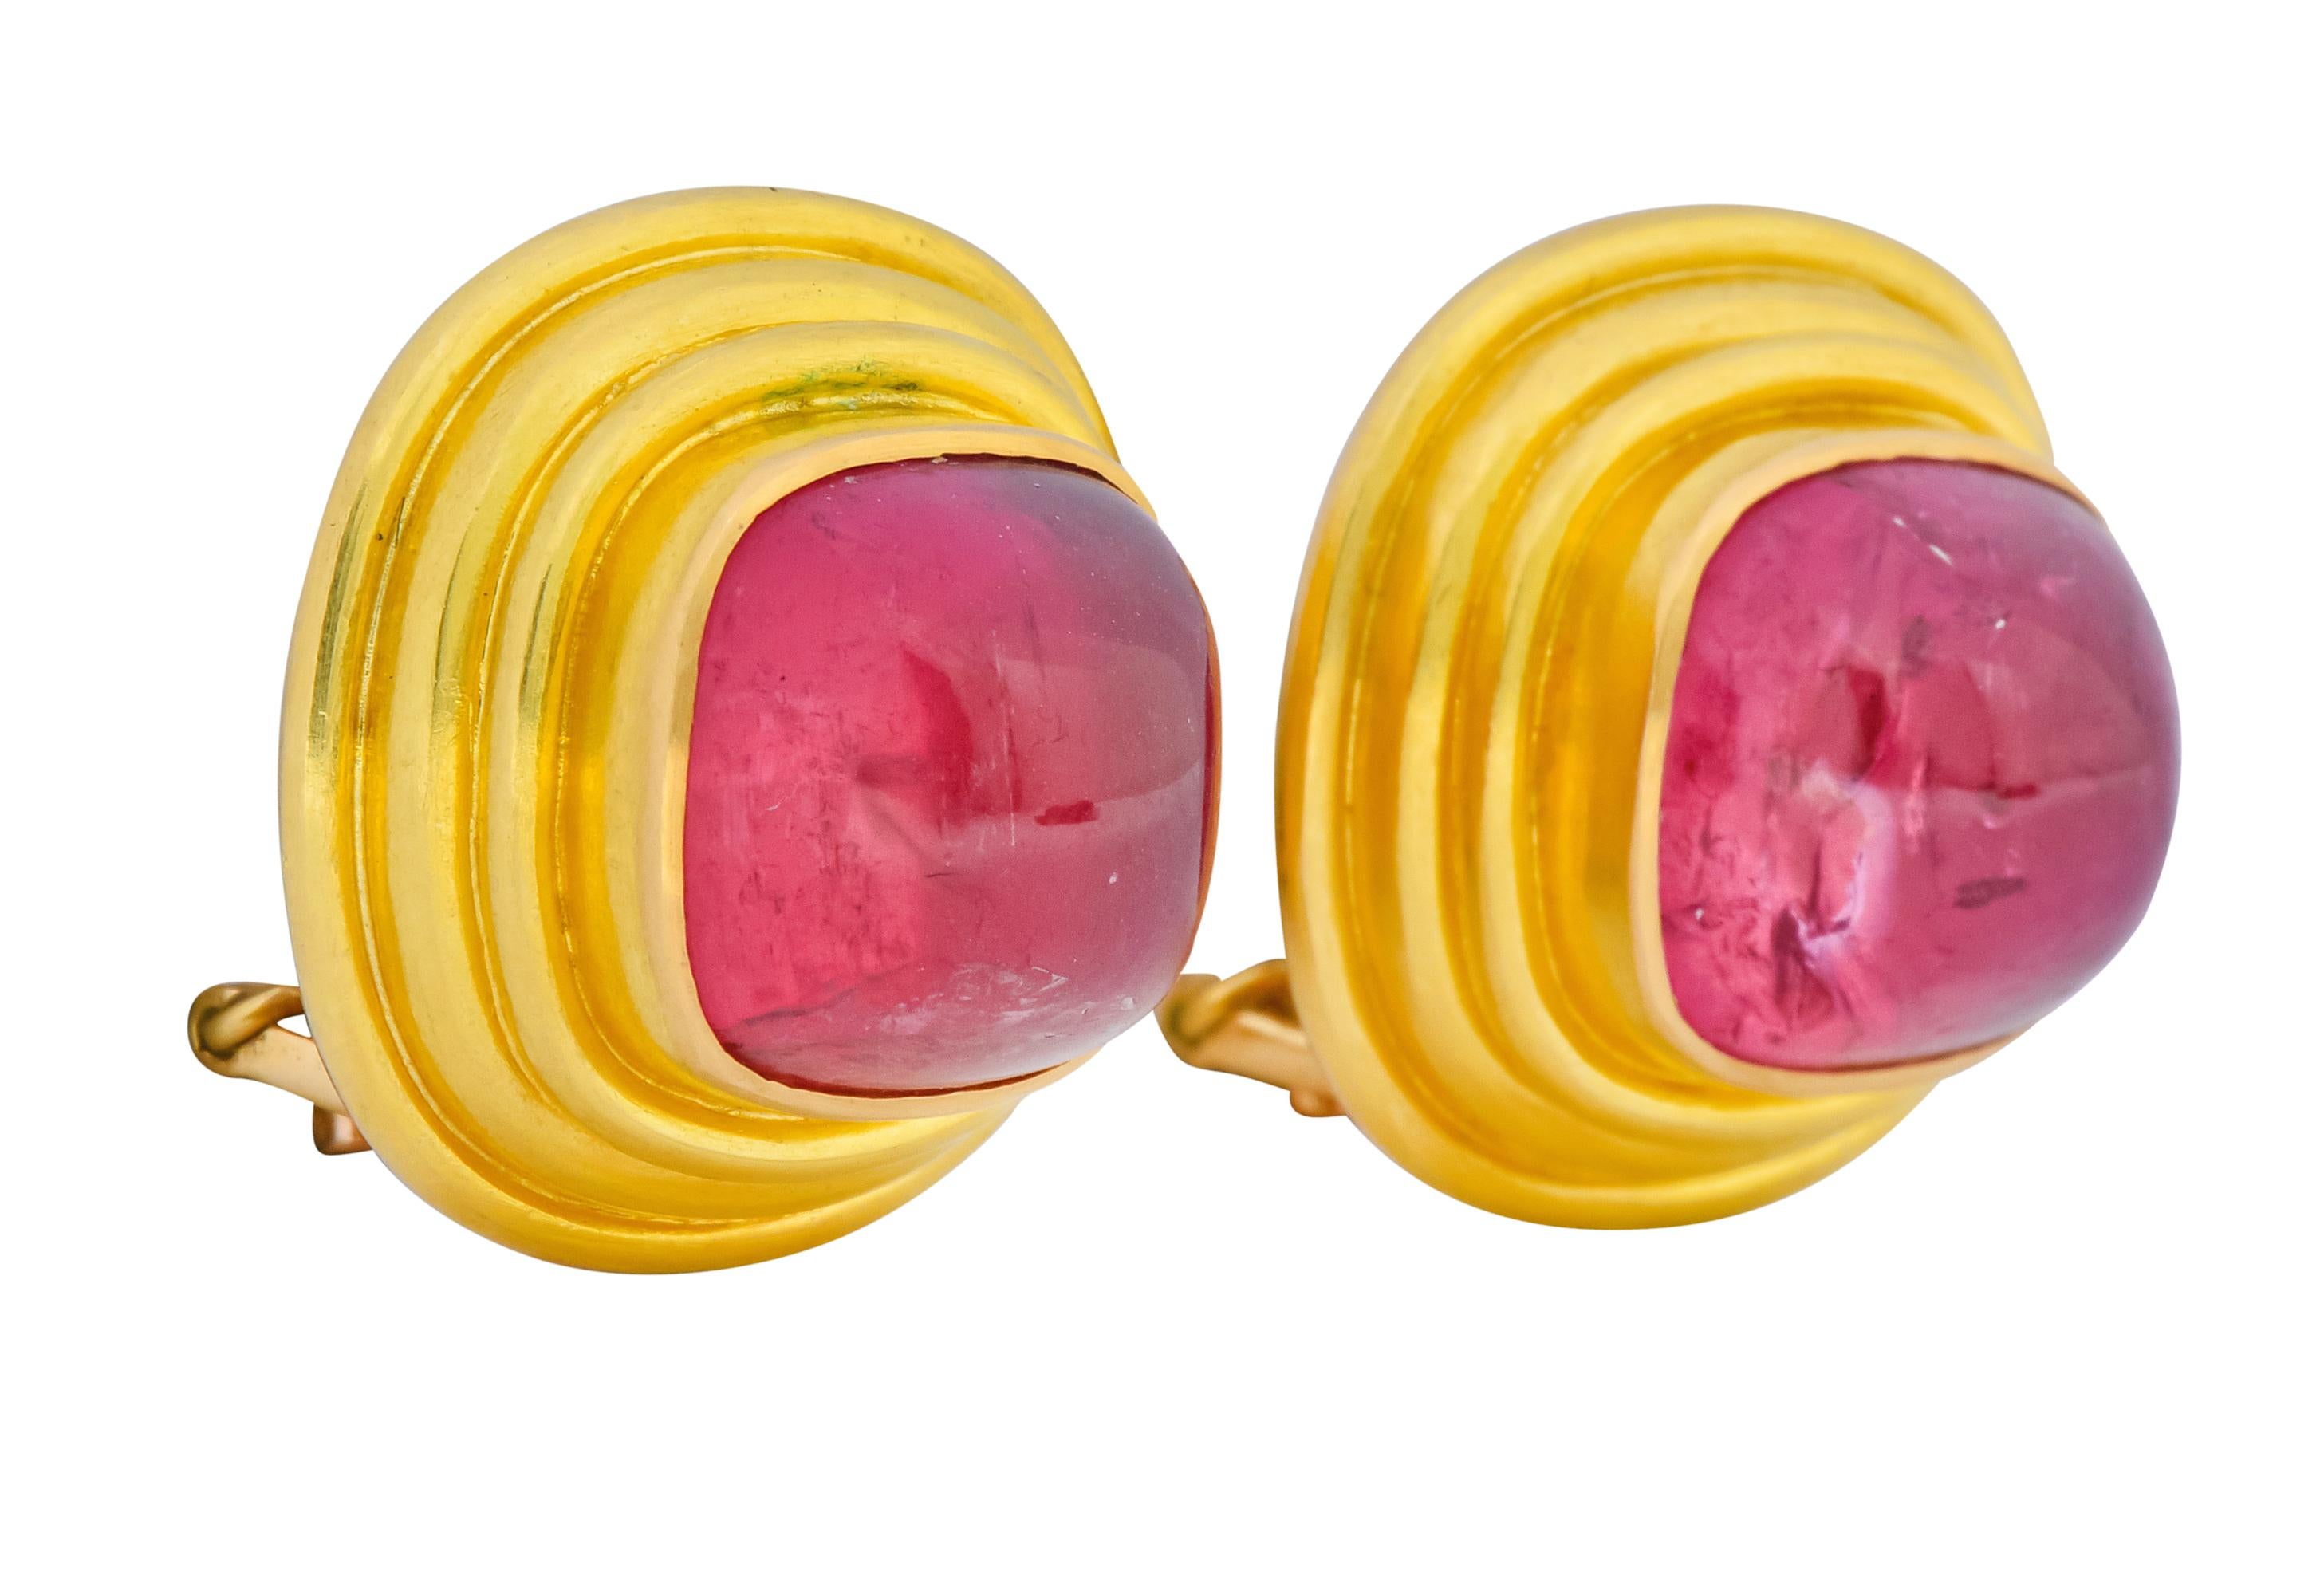 Each centering a highly domed cushion cabochon pink tourmaline, transparent and a saturated pink with beautiful natural inclusions

Bezel set in a matte gold surround with multiple ridges

Completed by a hinged omega back with optional articulated